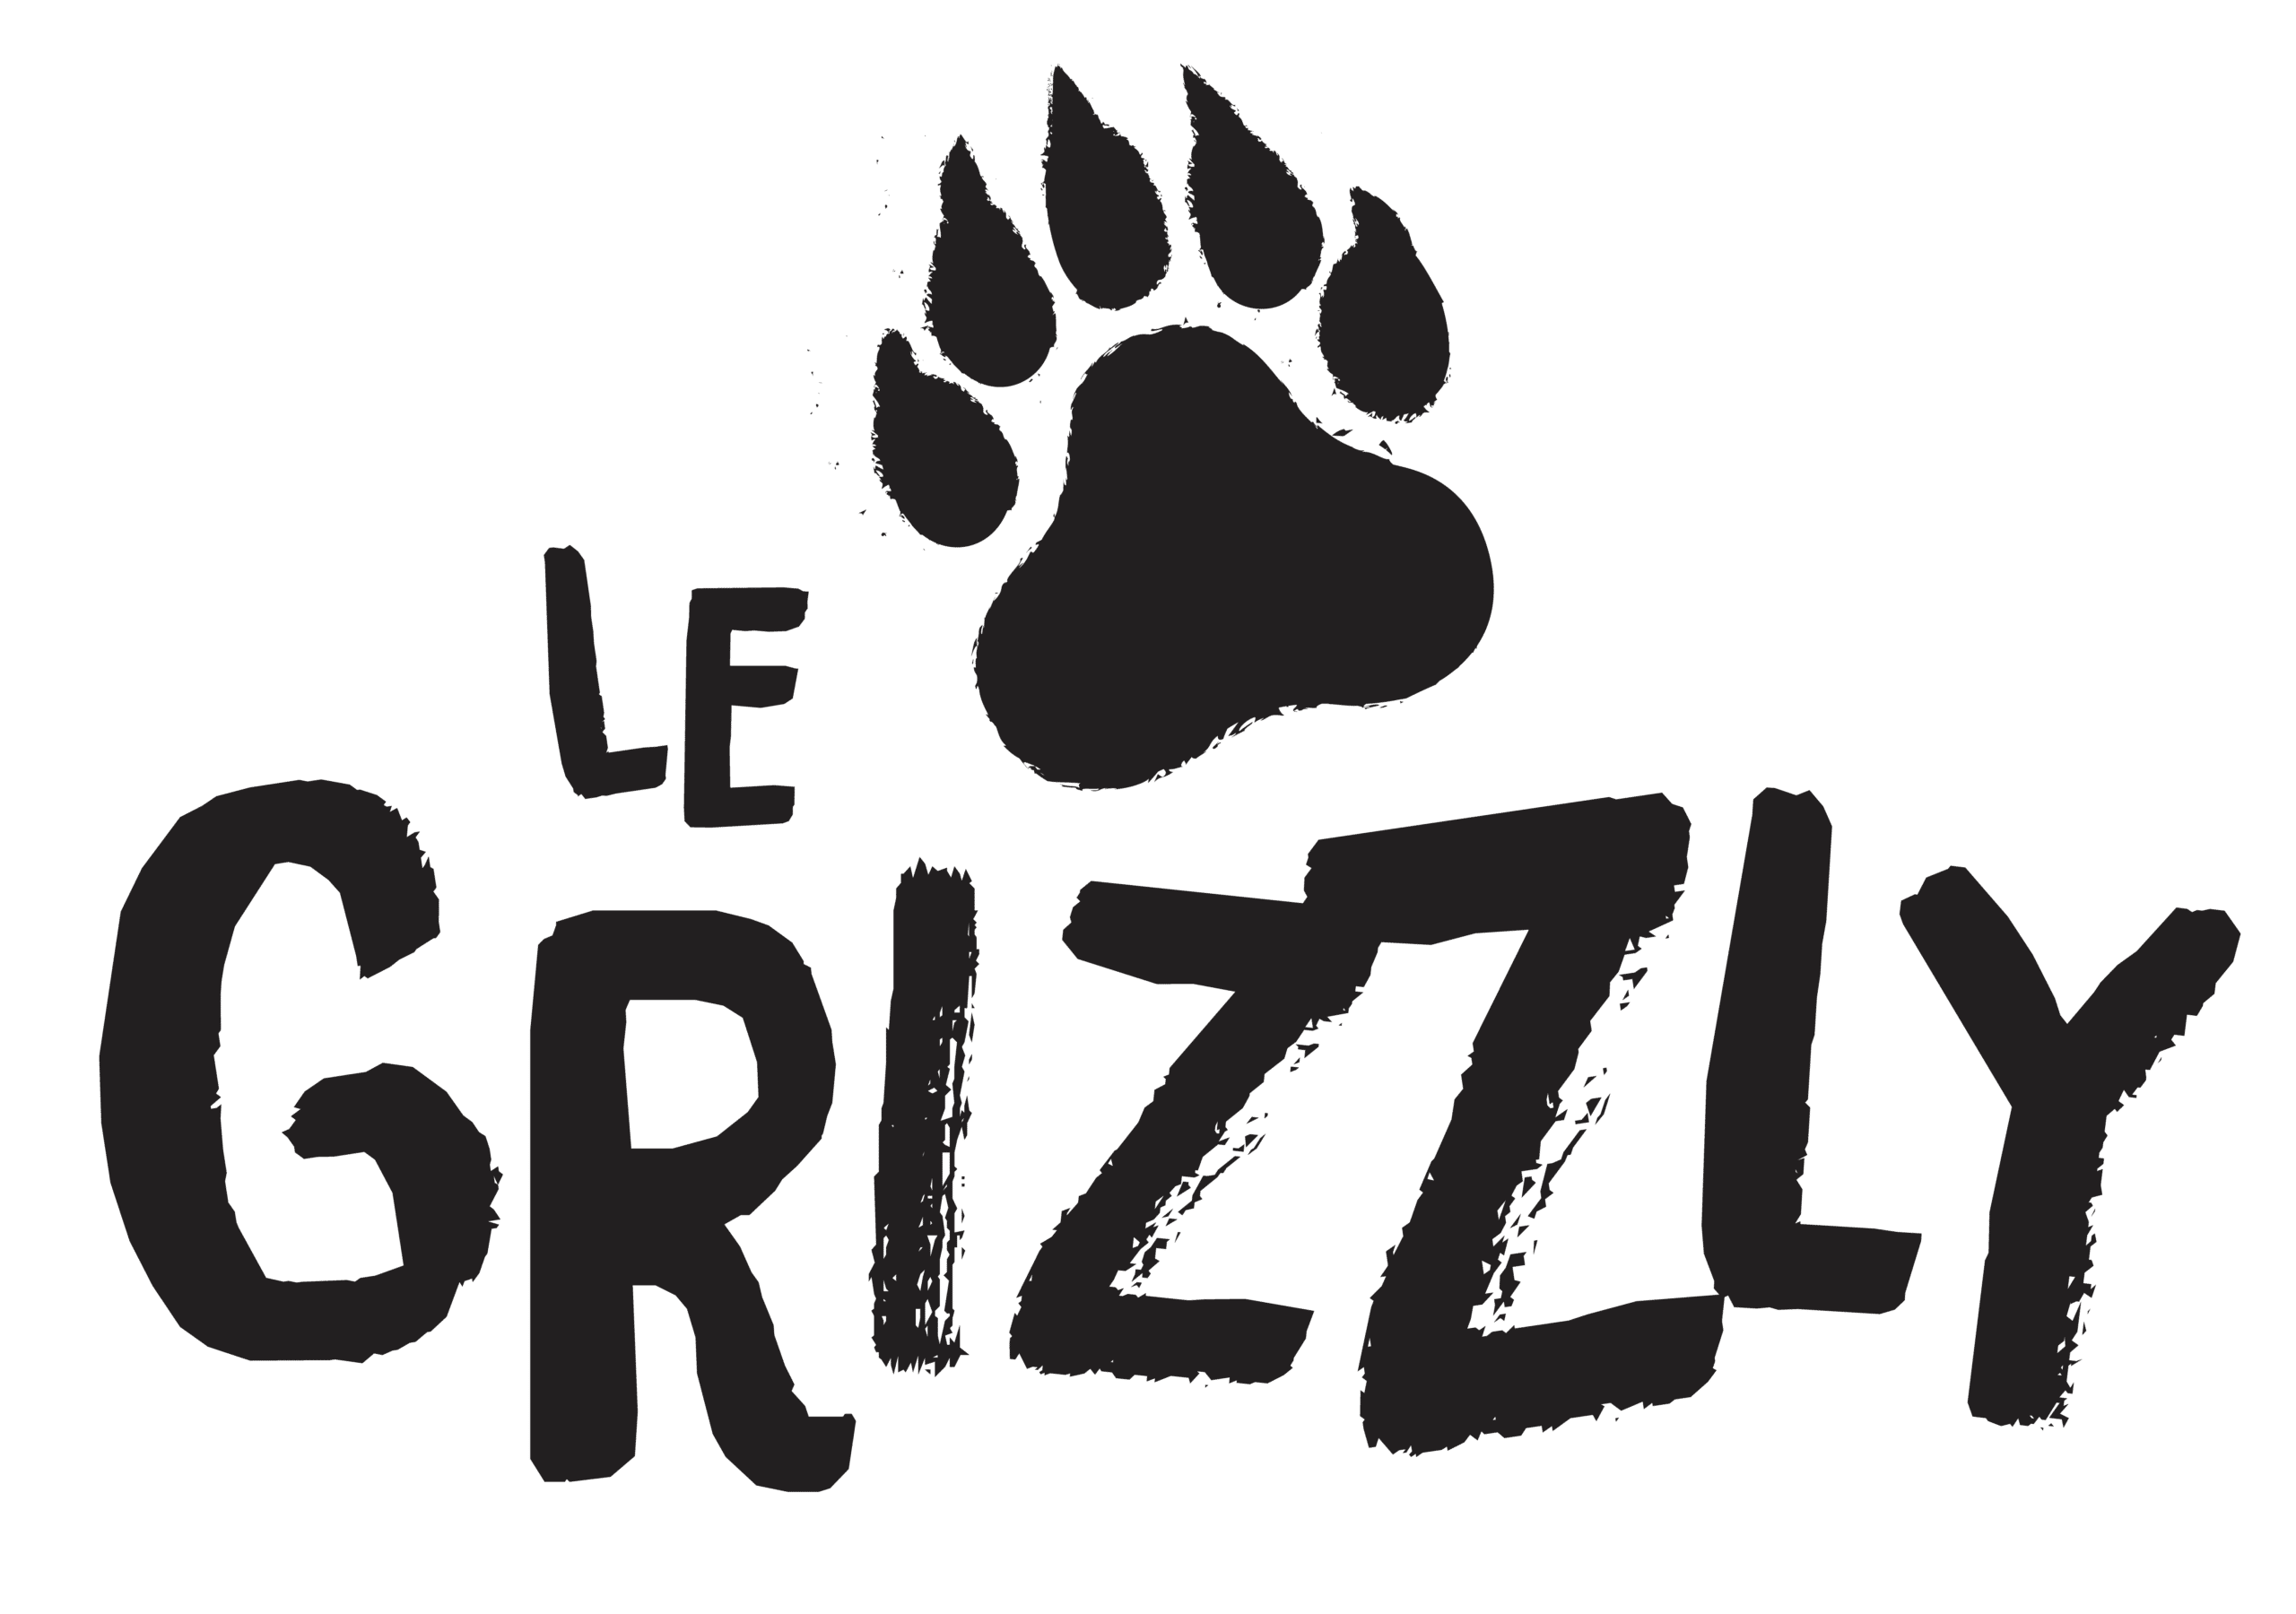 Le GRIZZLY